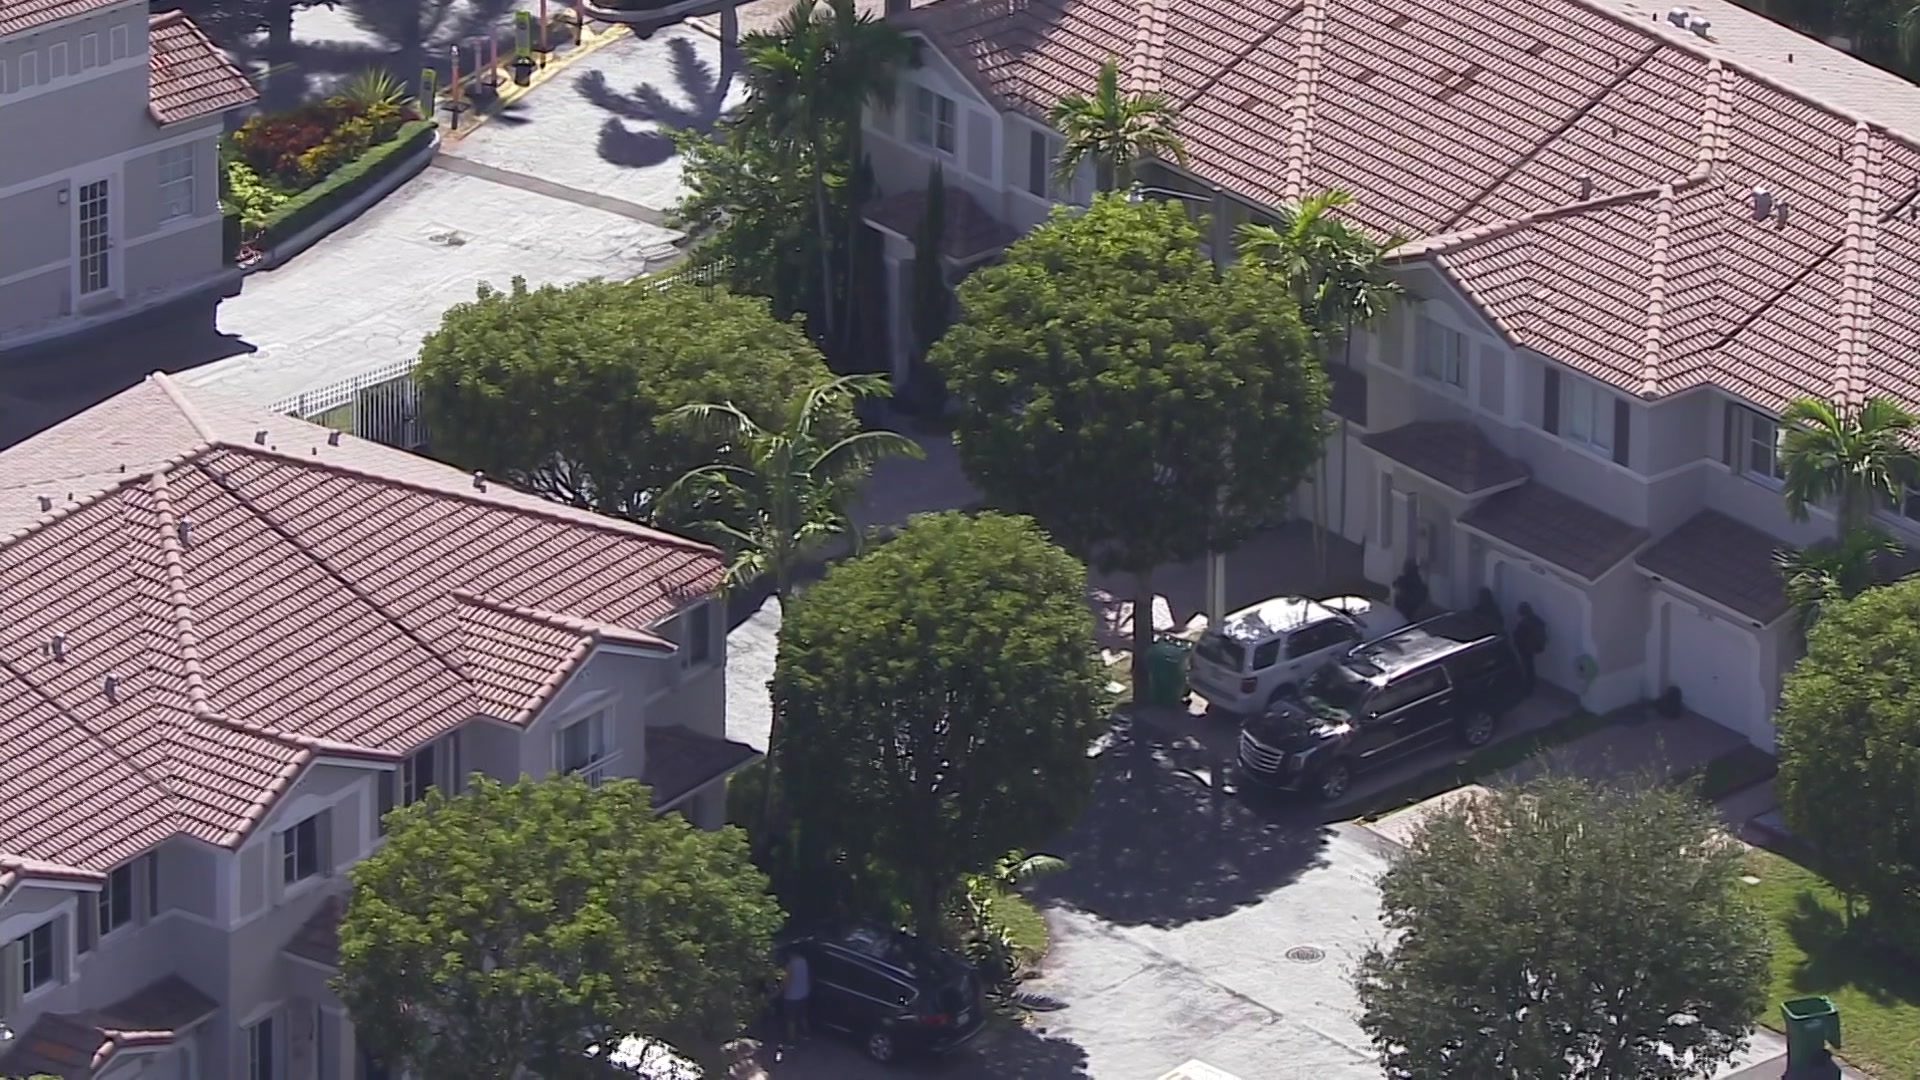 Doral Police Trying To Get A Barricaded Man To Surrender